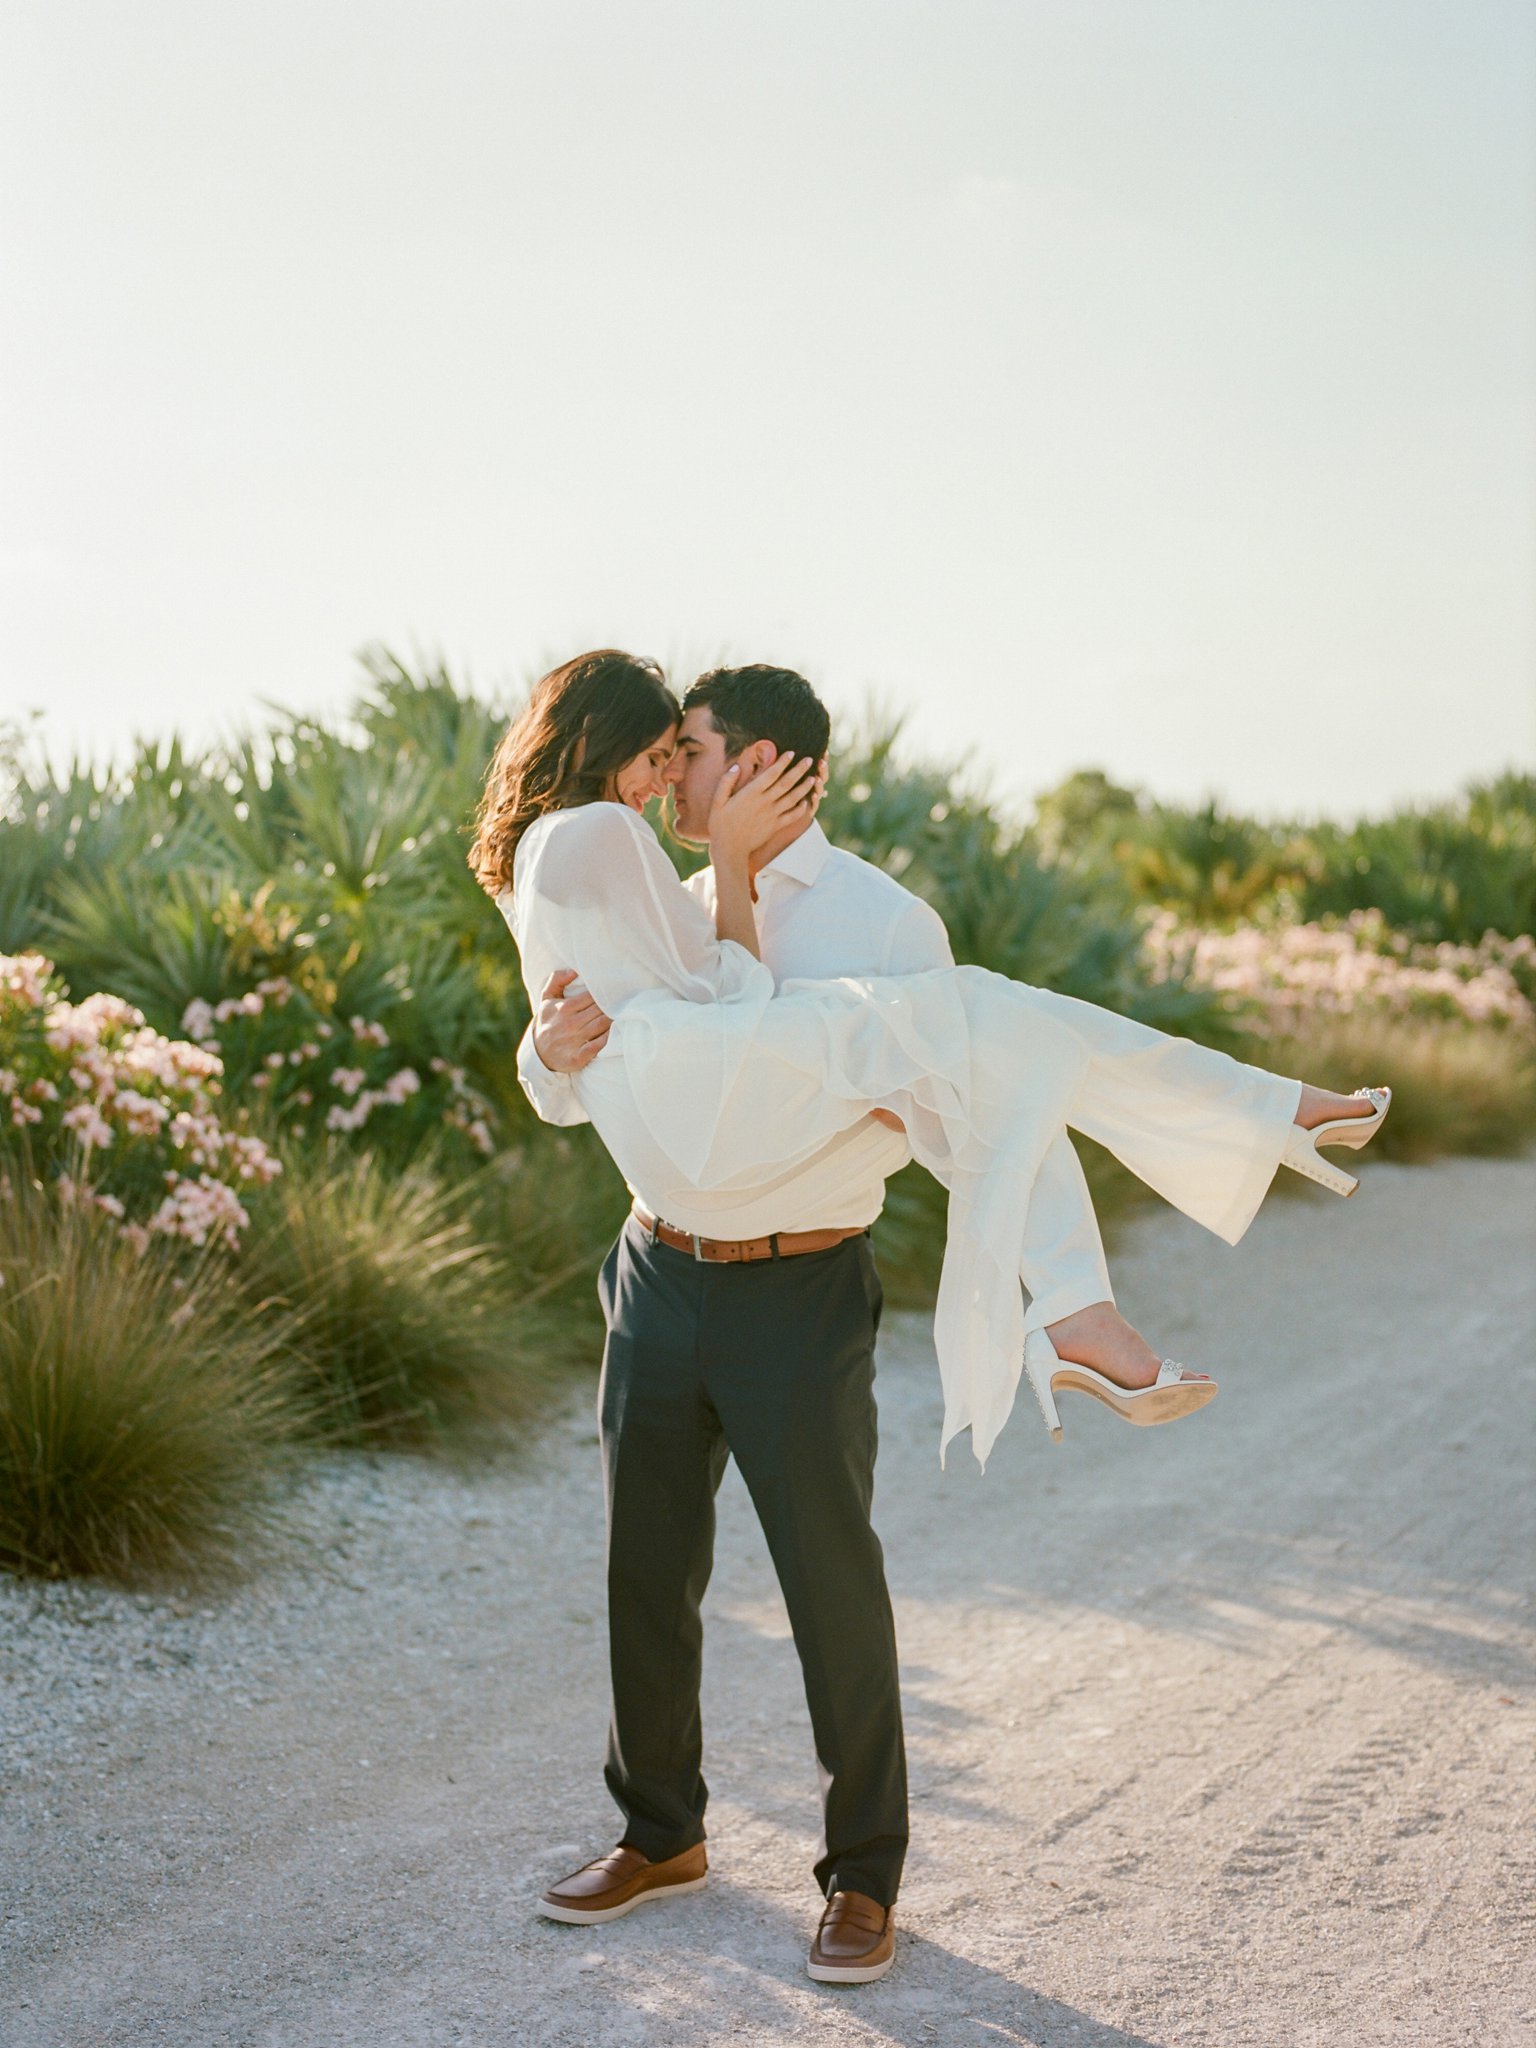 jw marriott marco island engagement session marco island wedding photographer shannon griffin photography_0020.jpg